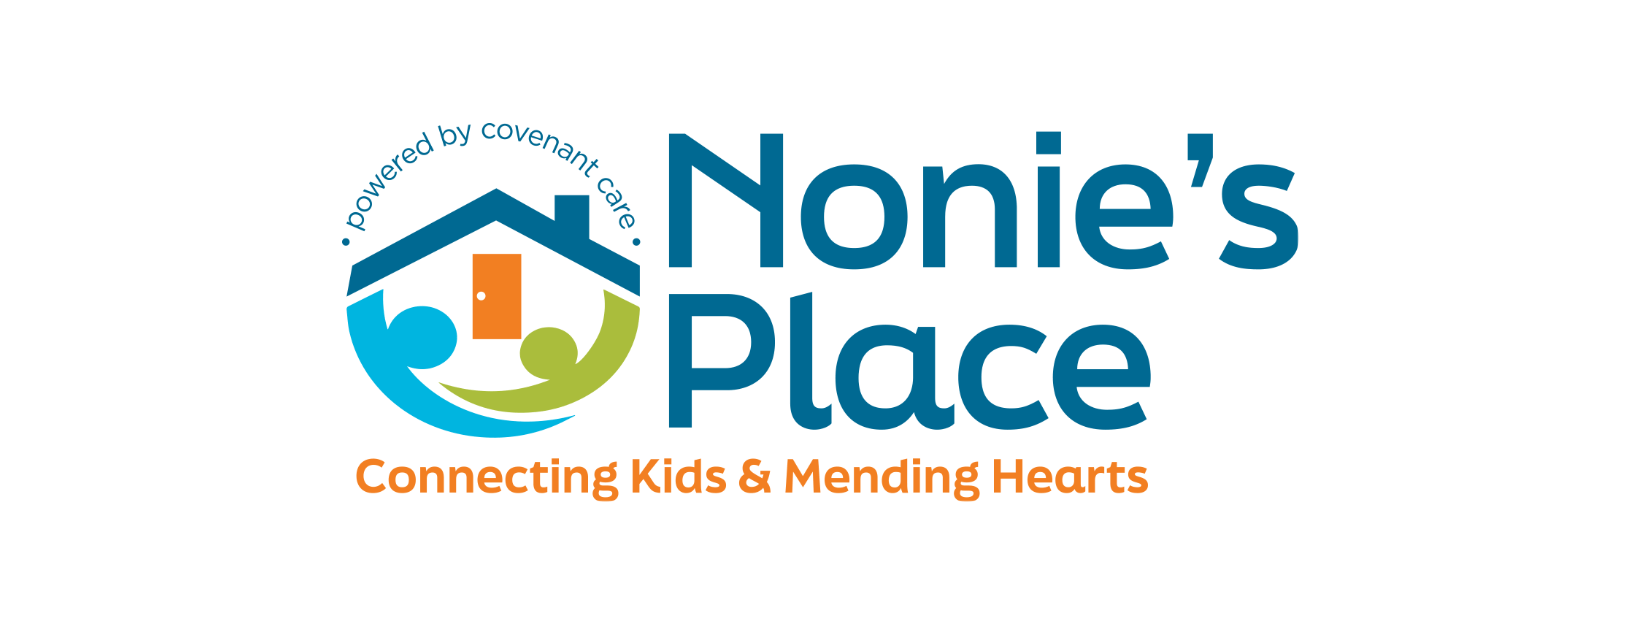 Kugelman Family Foundation Names Covenant Care’s Nonie’s Place